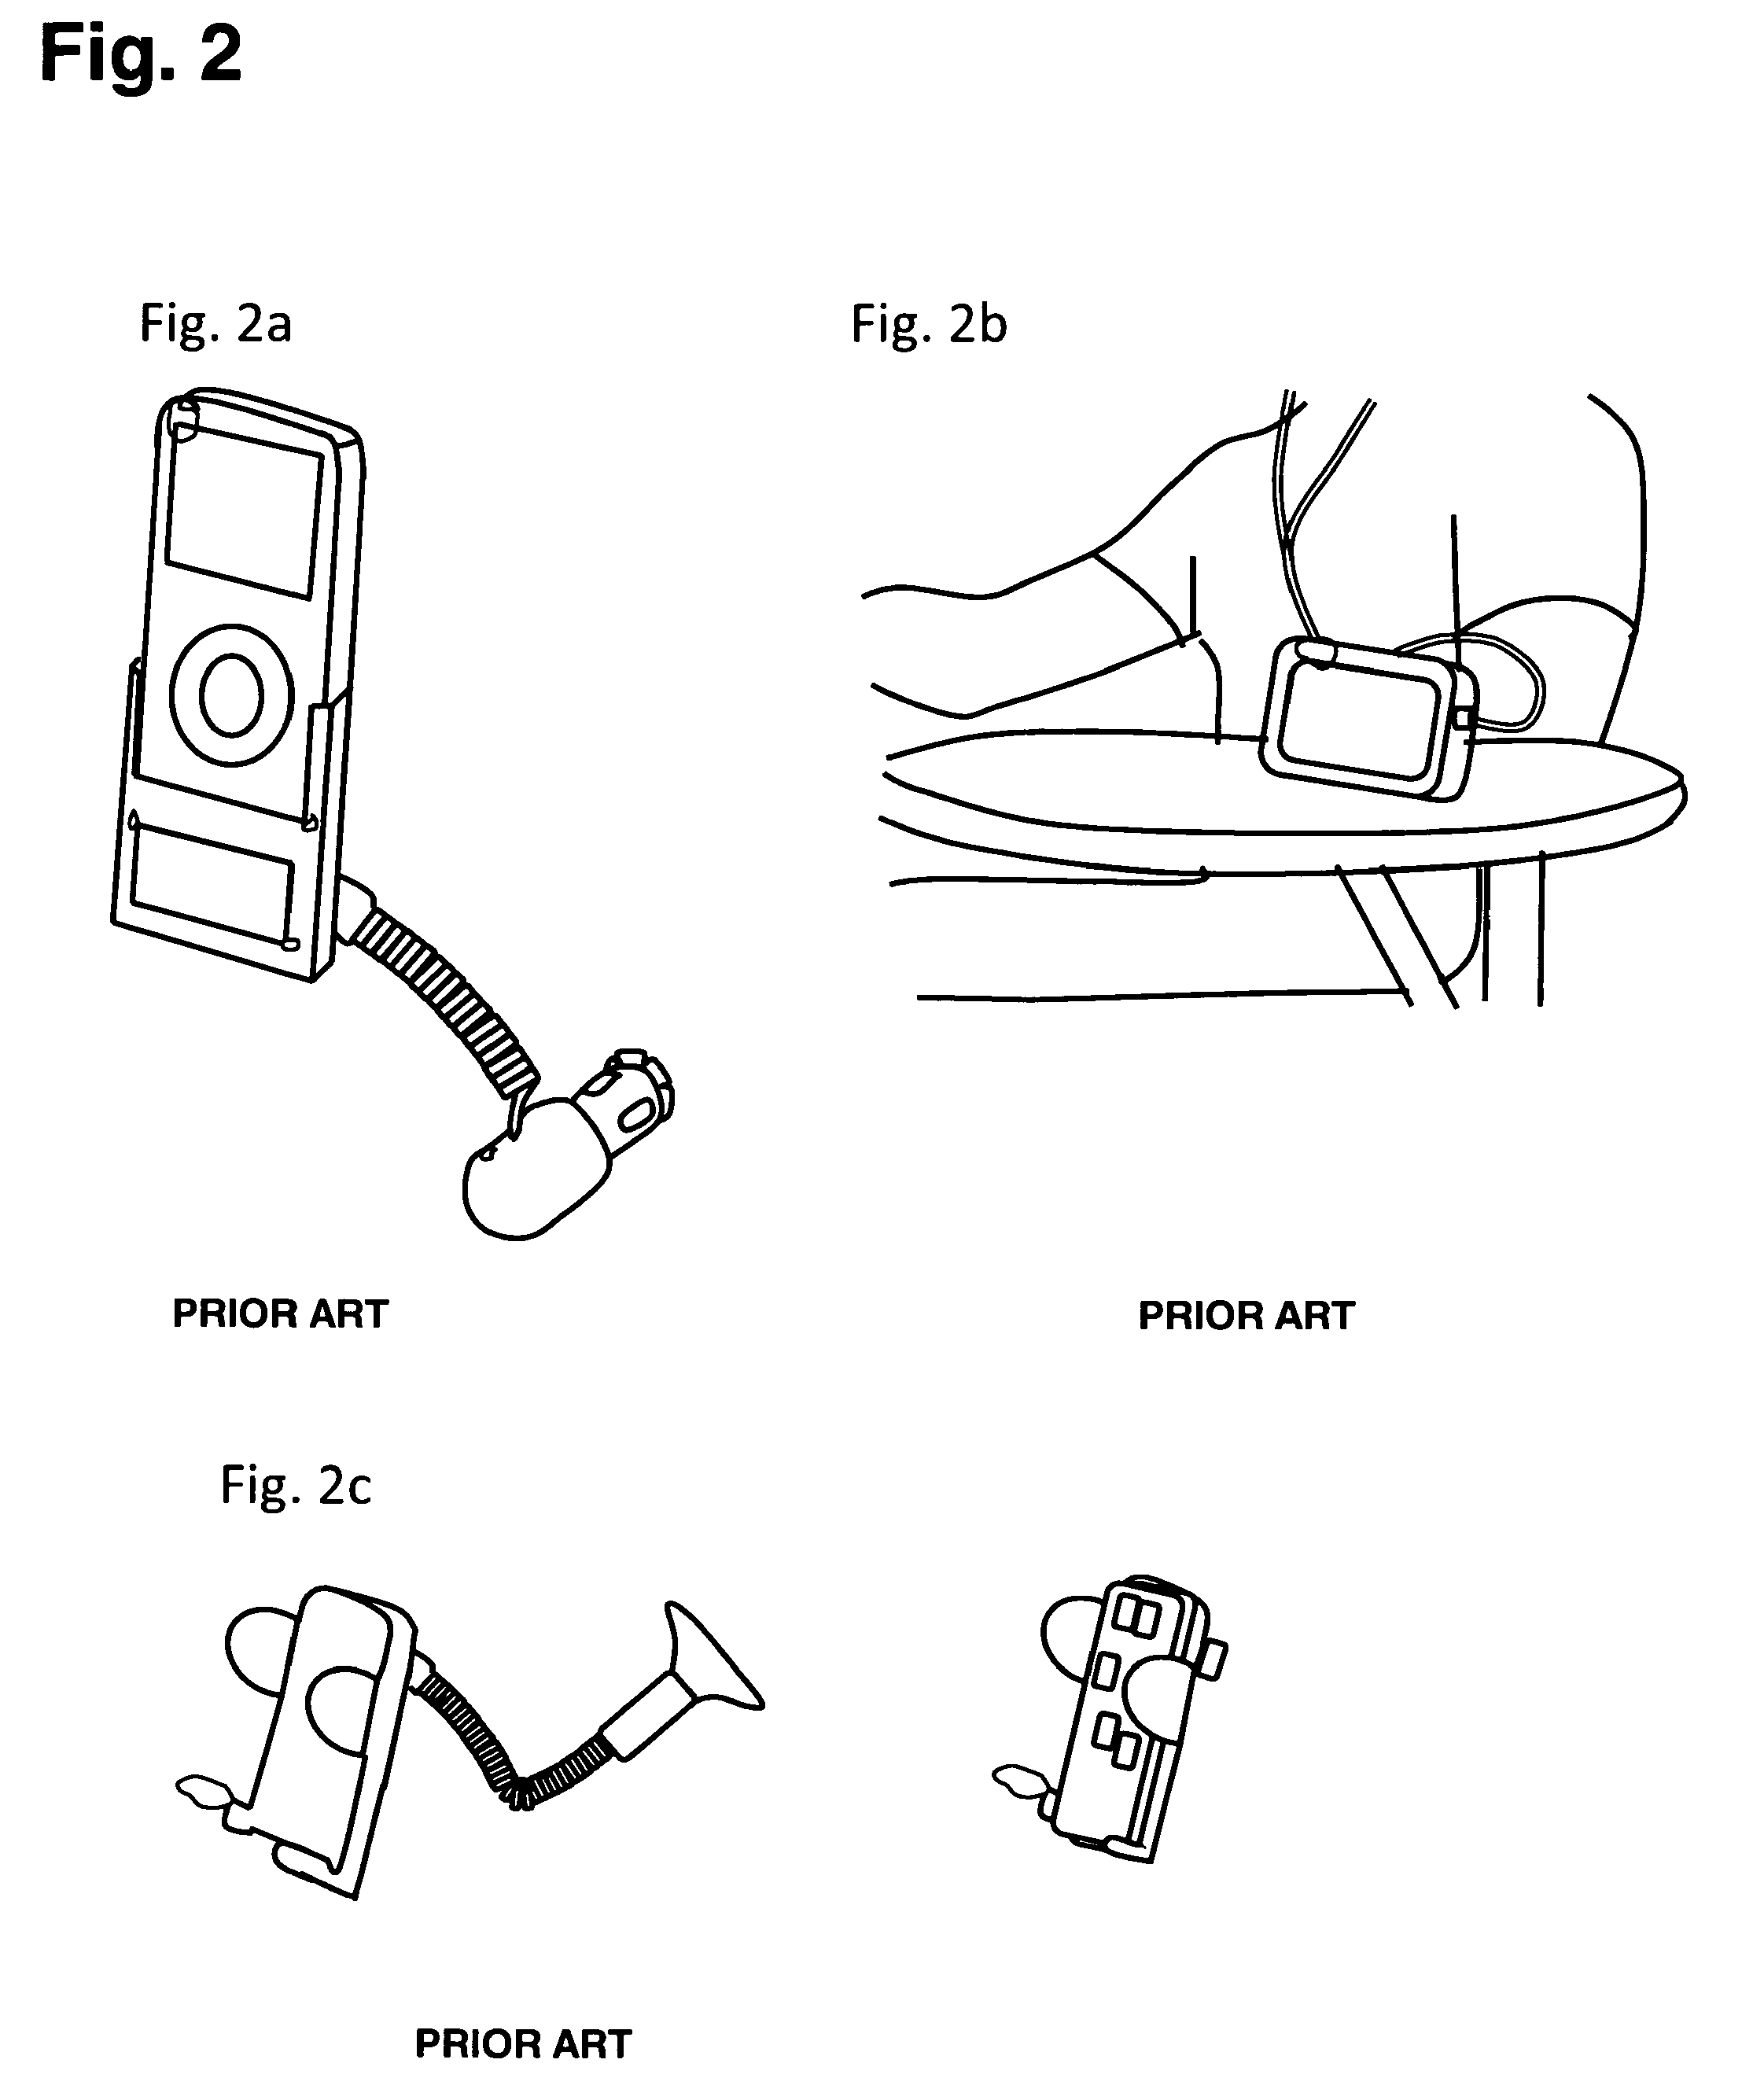 Hands-free device holder for securing hand-held portable electronic device with a screen